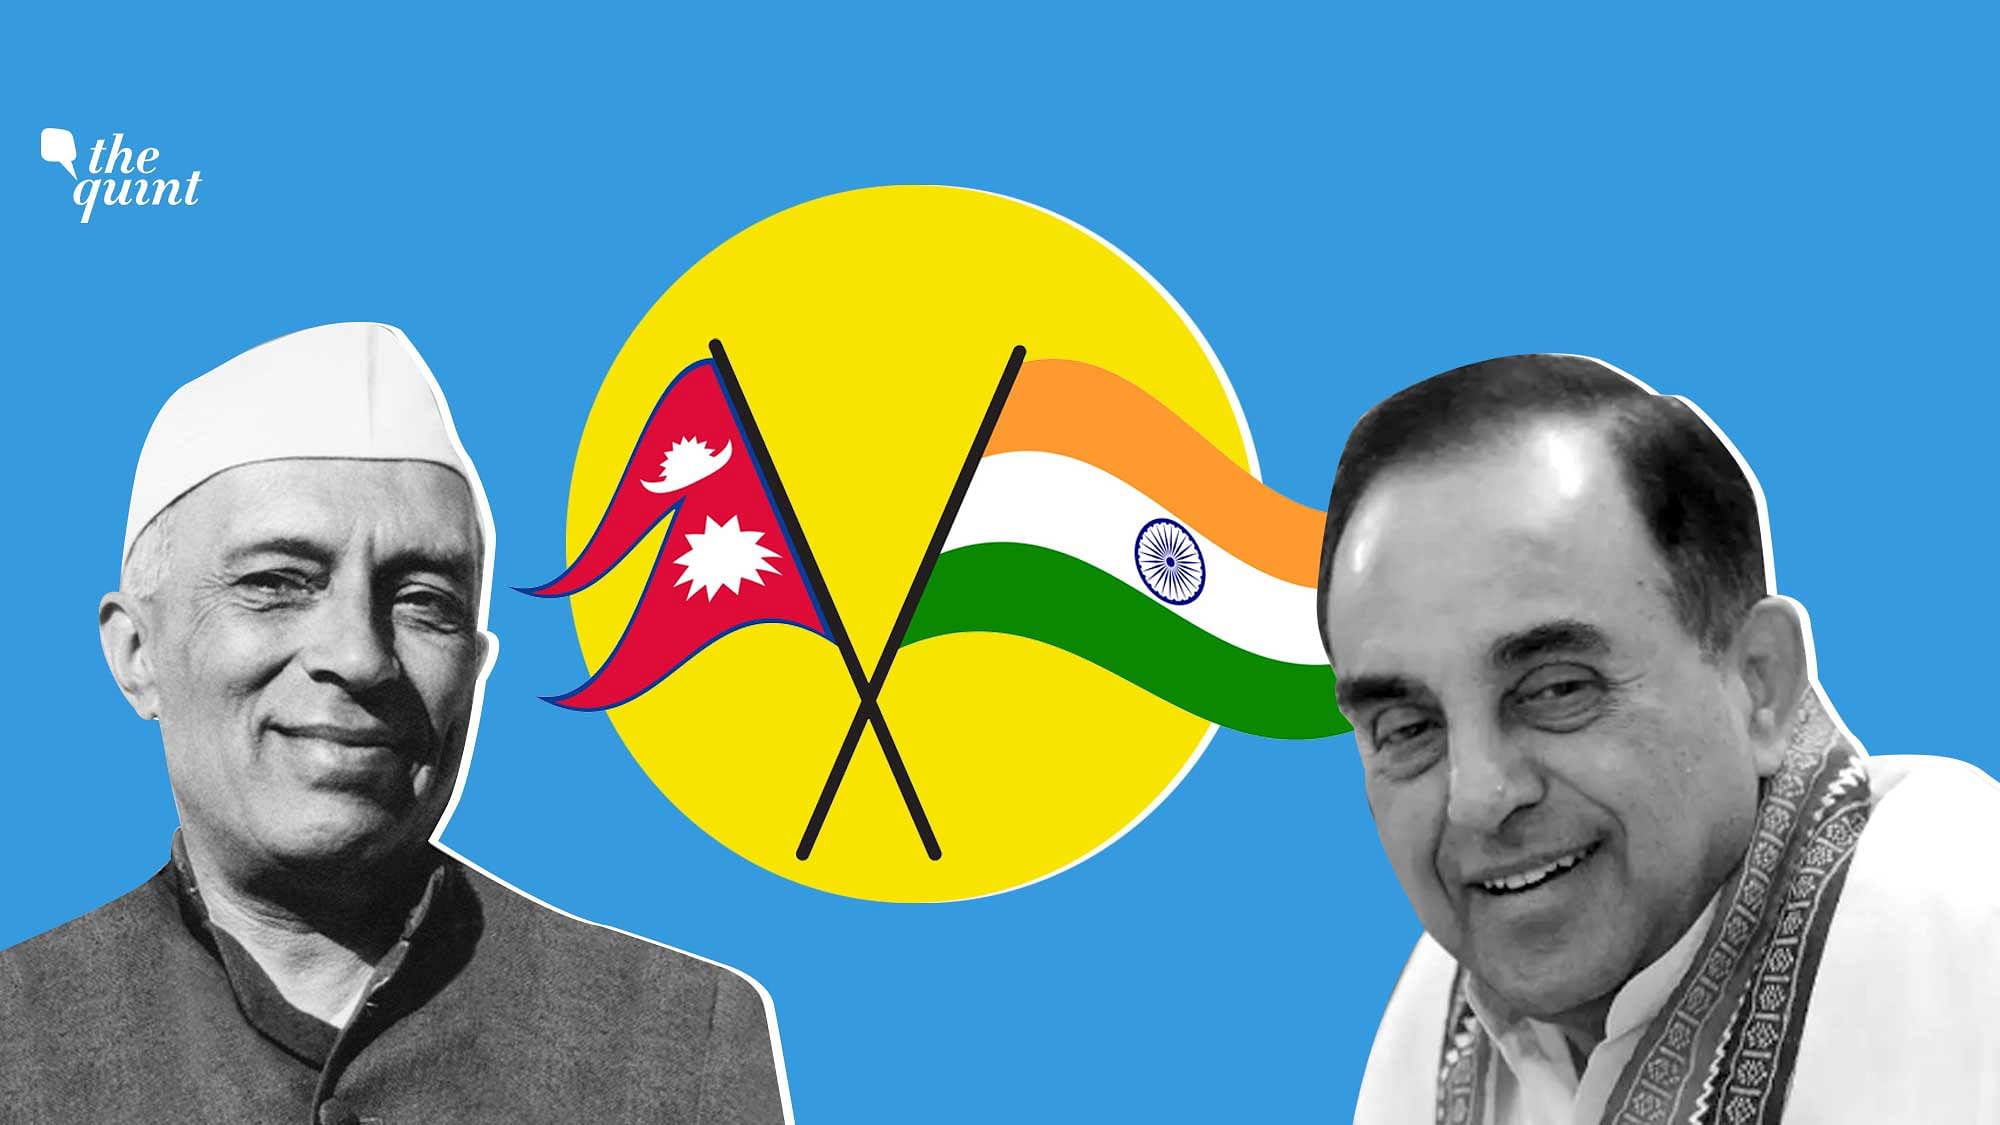 BJP MP Subramanian Swamy took to Twitter to claim that Jawaharlal Nehru rejected the offer of the Rana rulers in 1950 wherein the Ranas had offered to merge India and Nepal.